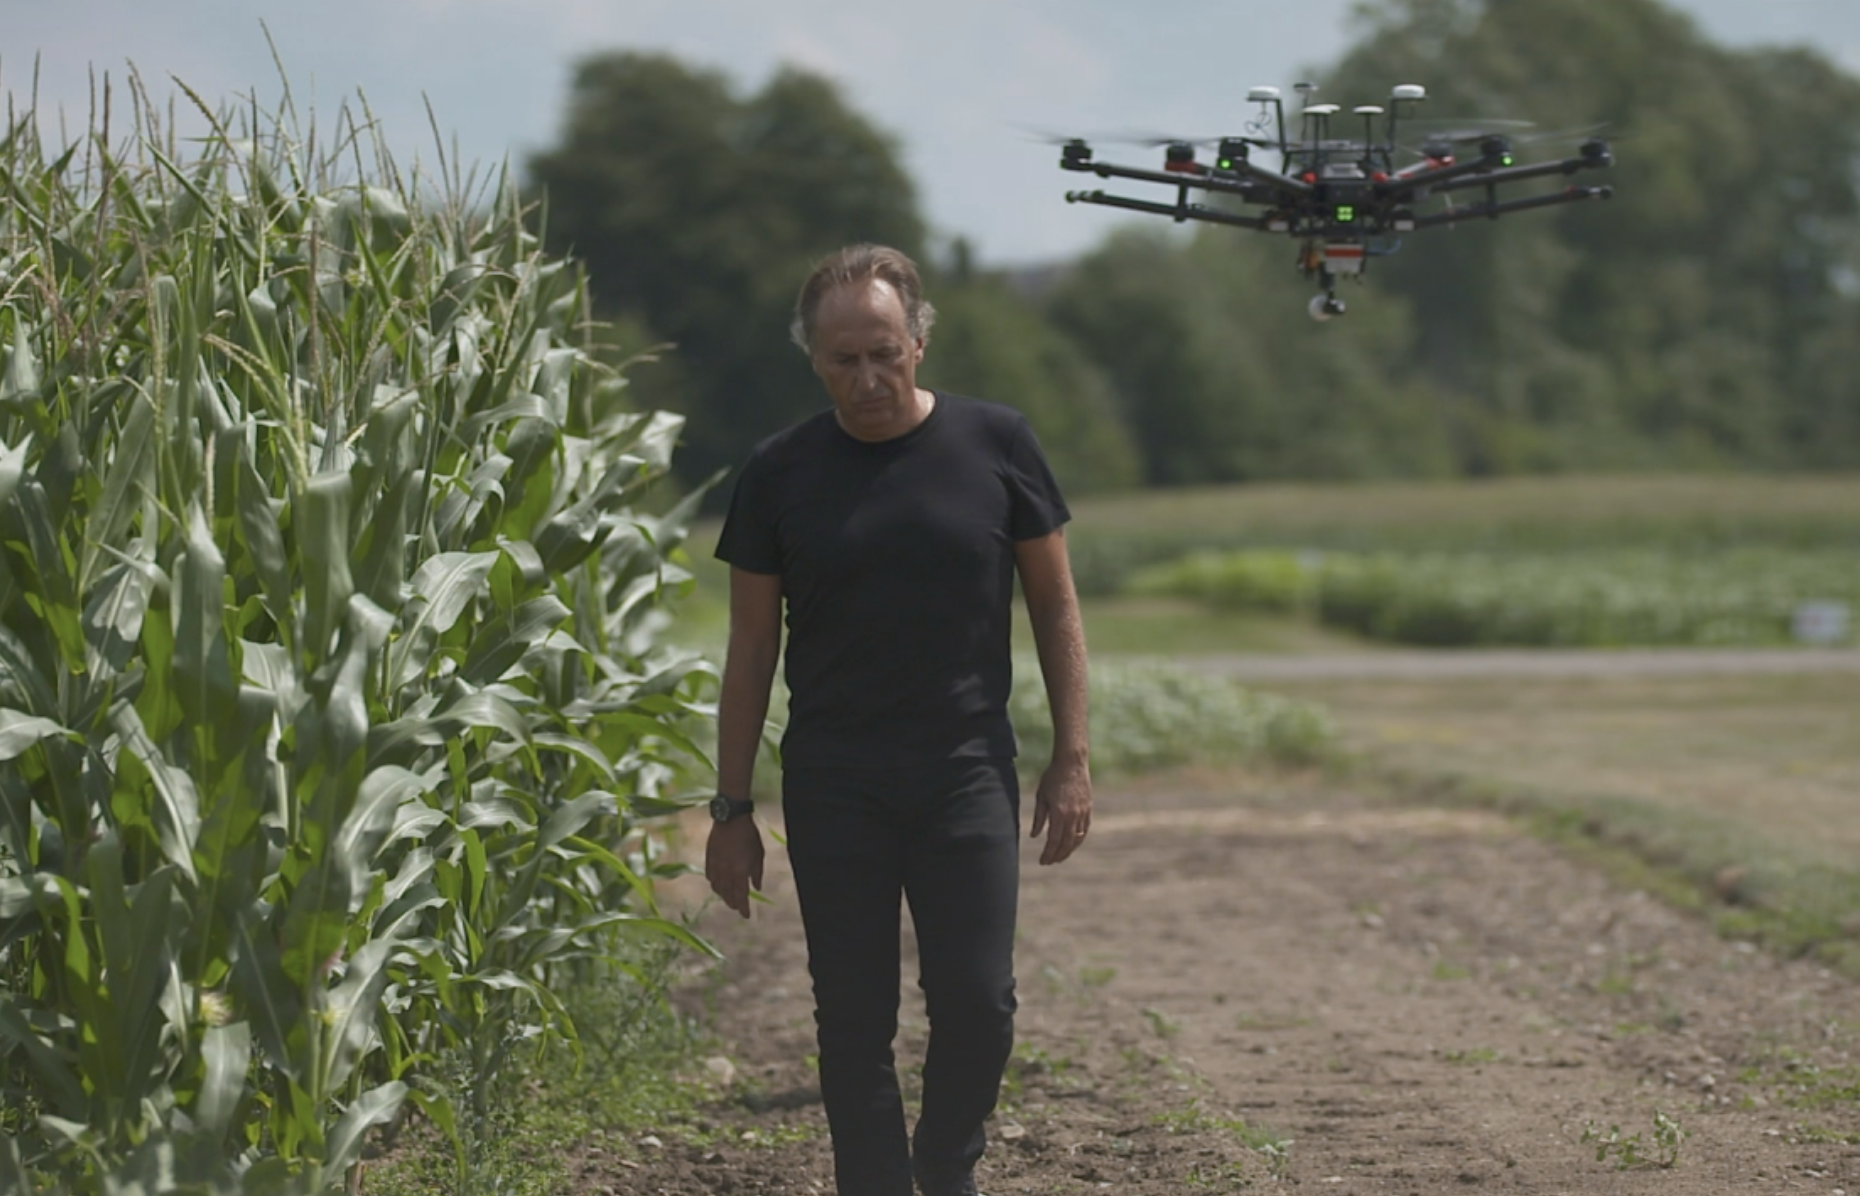 Bruno Basso with drone